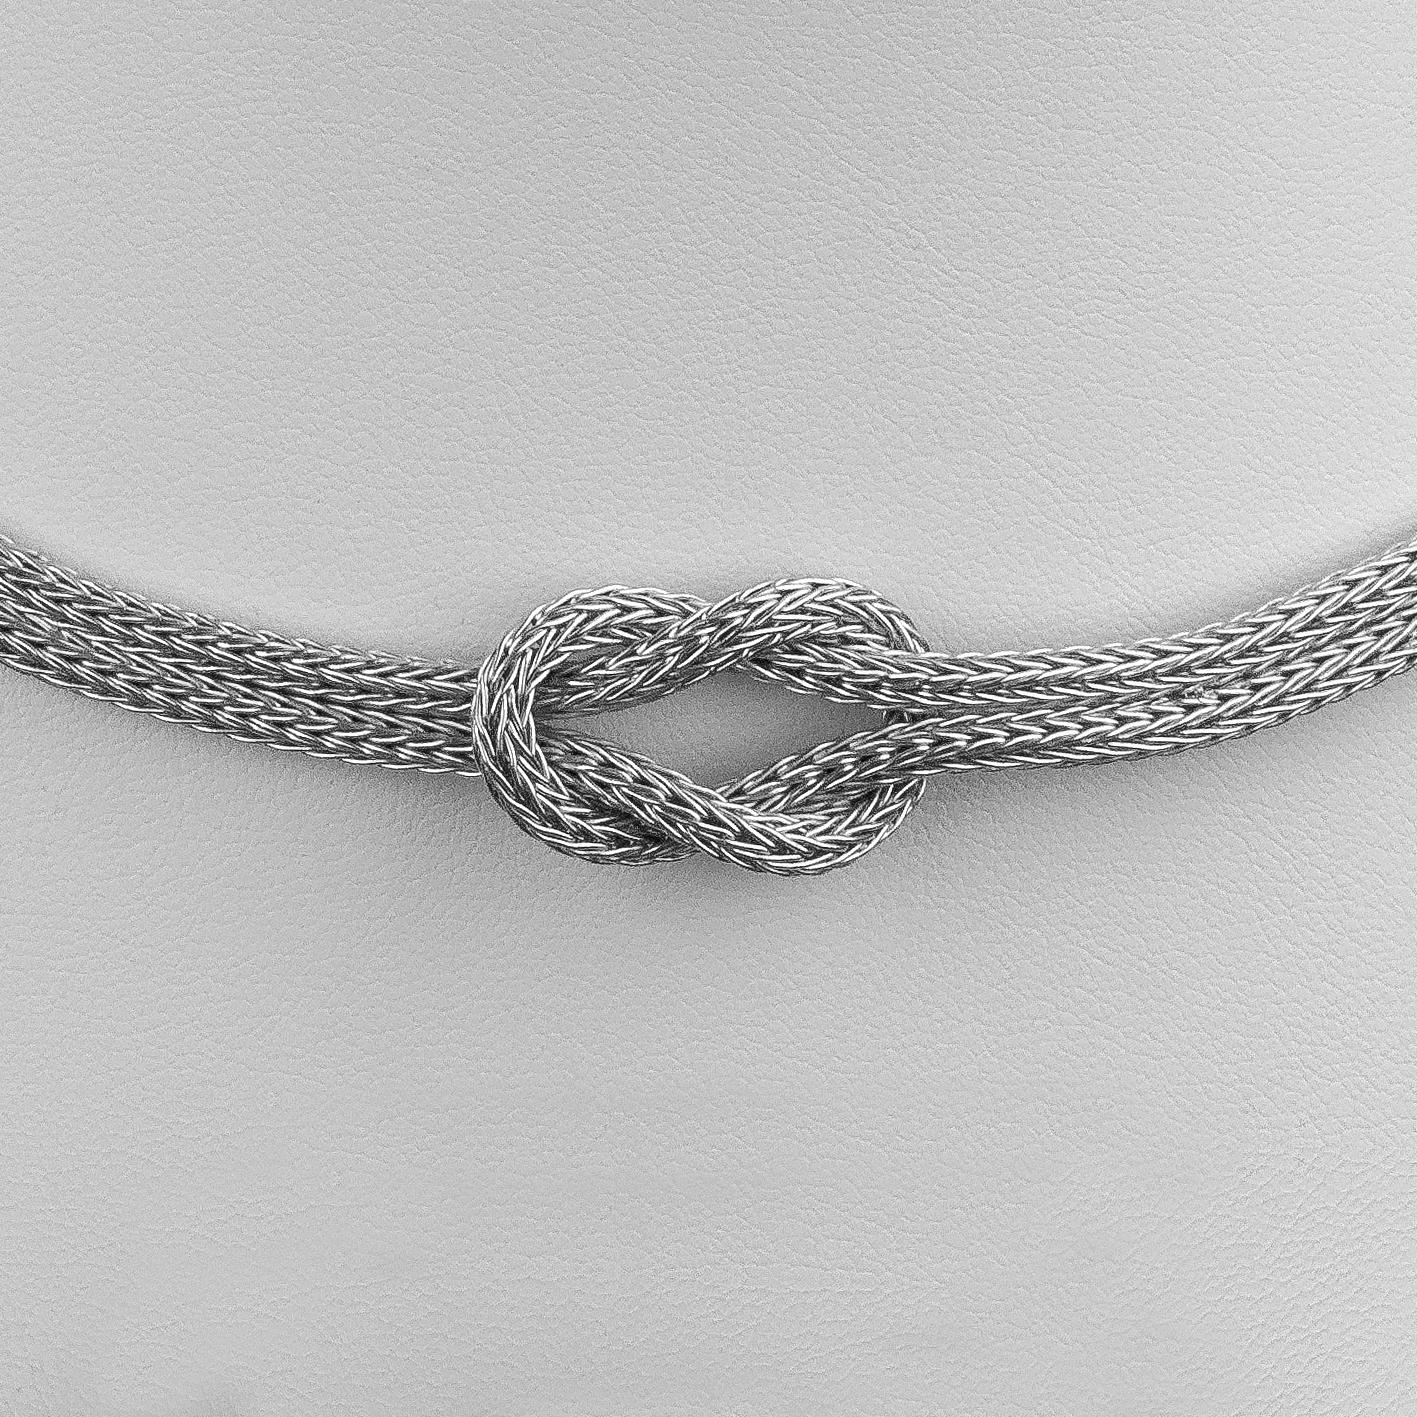 Simple yet striking S.Georgios designer rope necklace with Hercules Knot from 18 Karat white gold all handmade in Greece, knitted in our workshop. The Hercules knot is a symbol of strength, healing and protection and marriage (tying the knot). Each